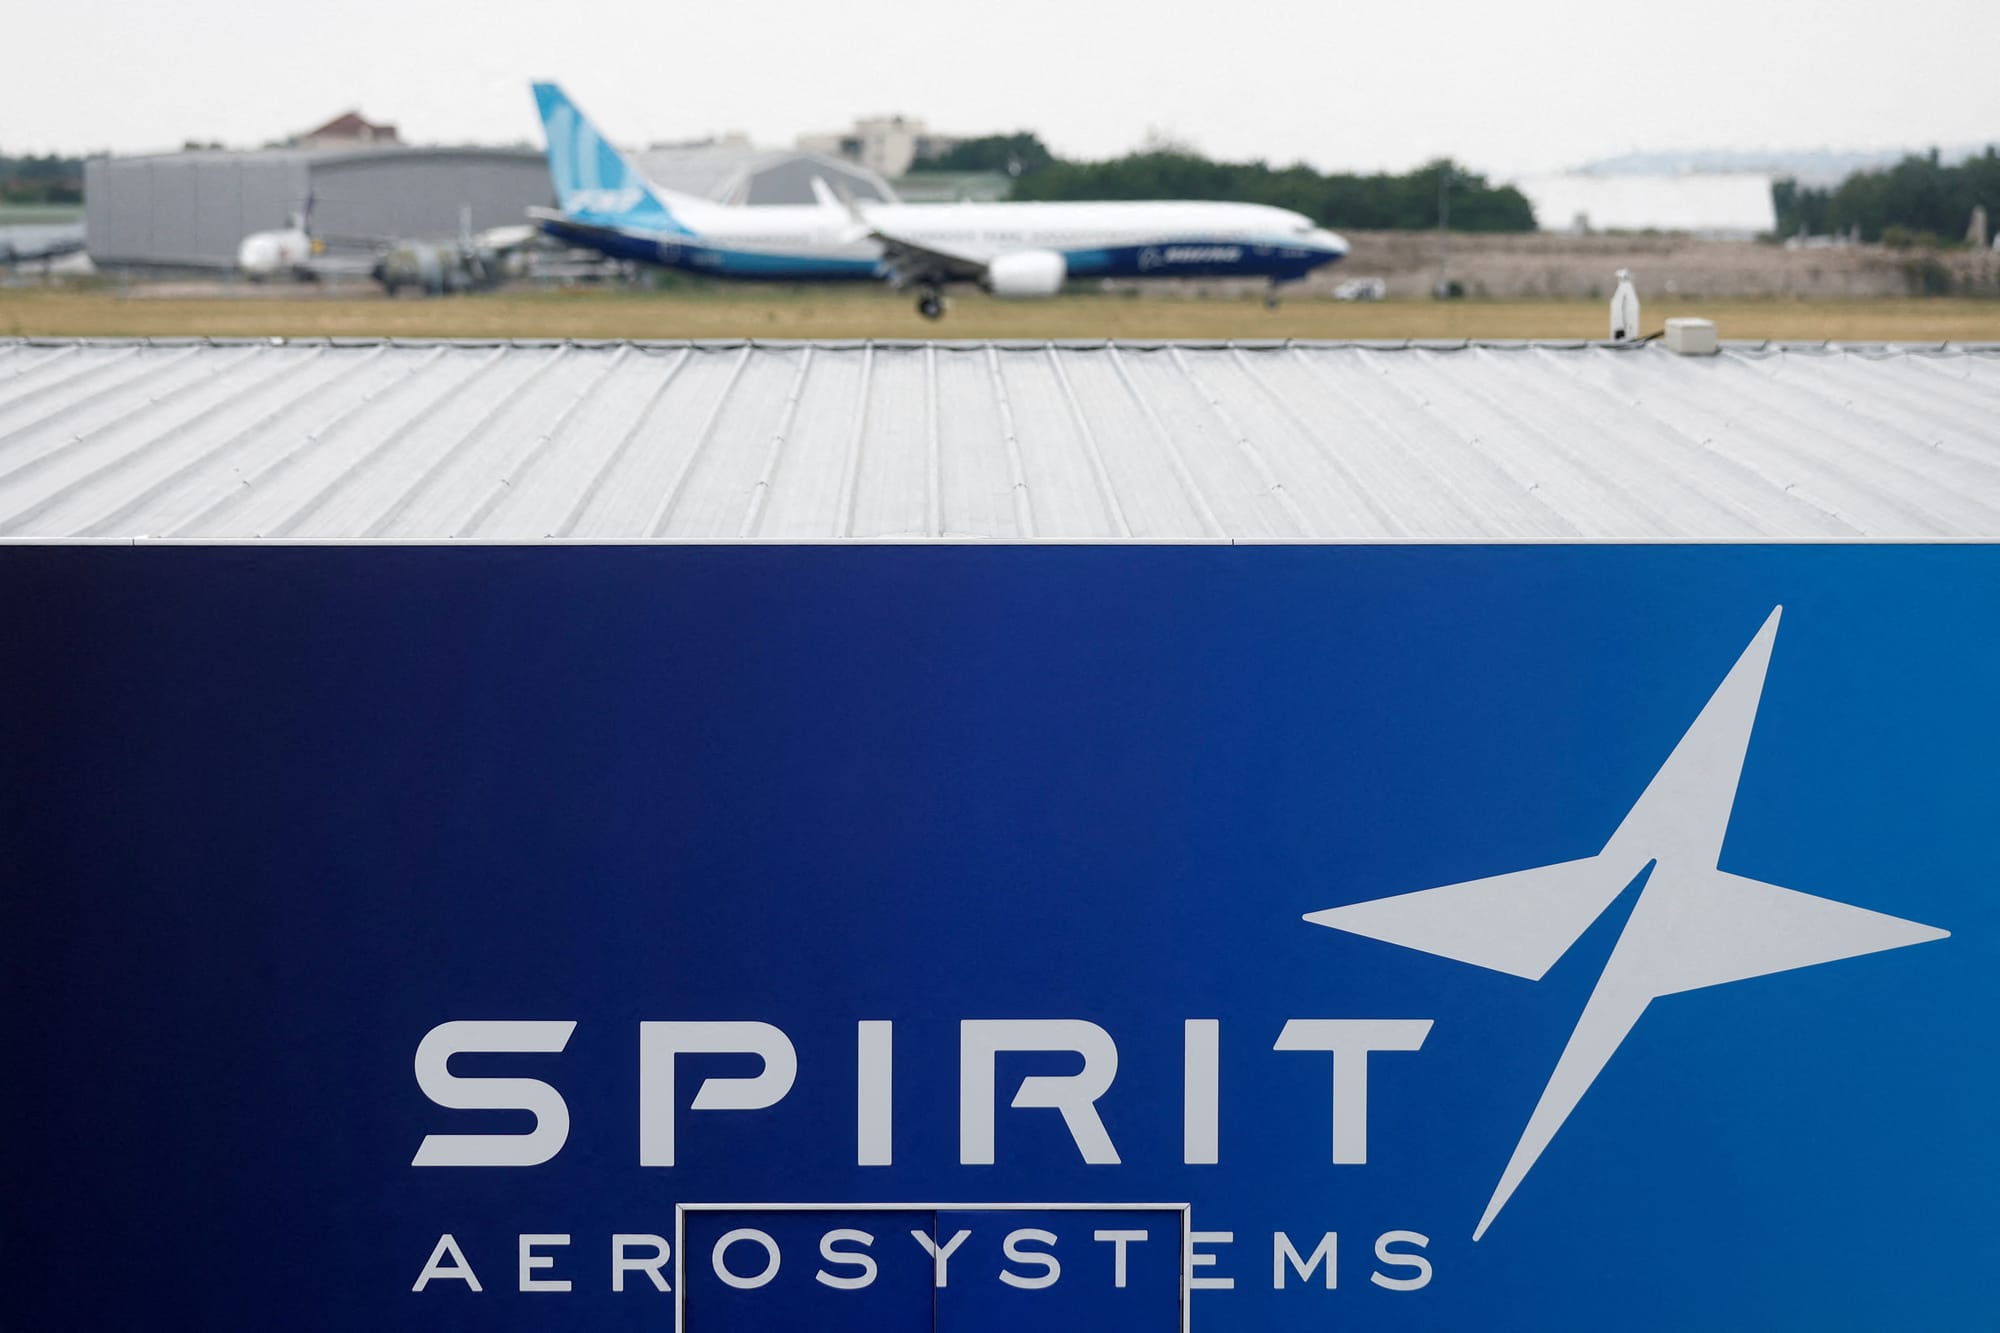 Boeing Reacquires Spirit AeroSystems for $4.7 Billion; Airbus Snags Key Facilities in Strategic Realignment